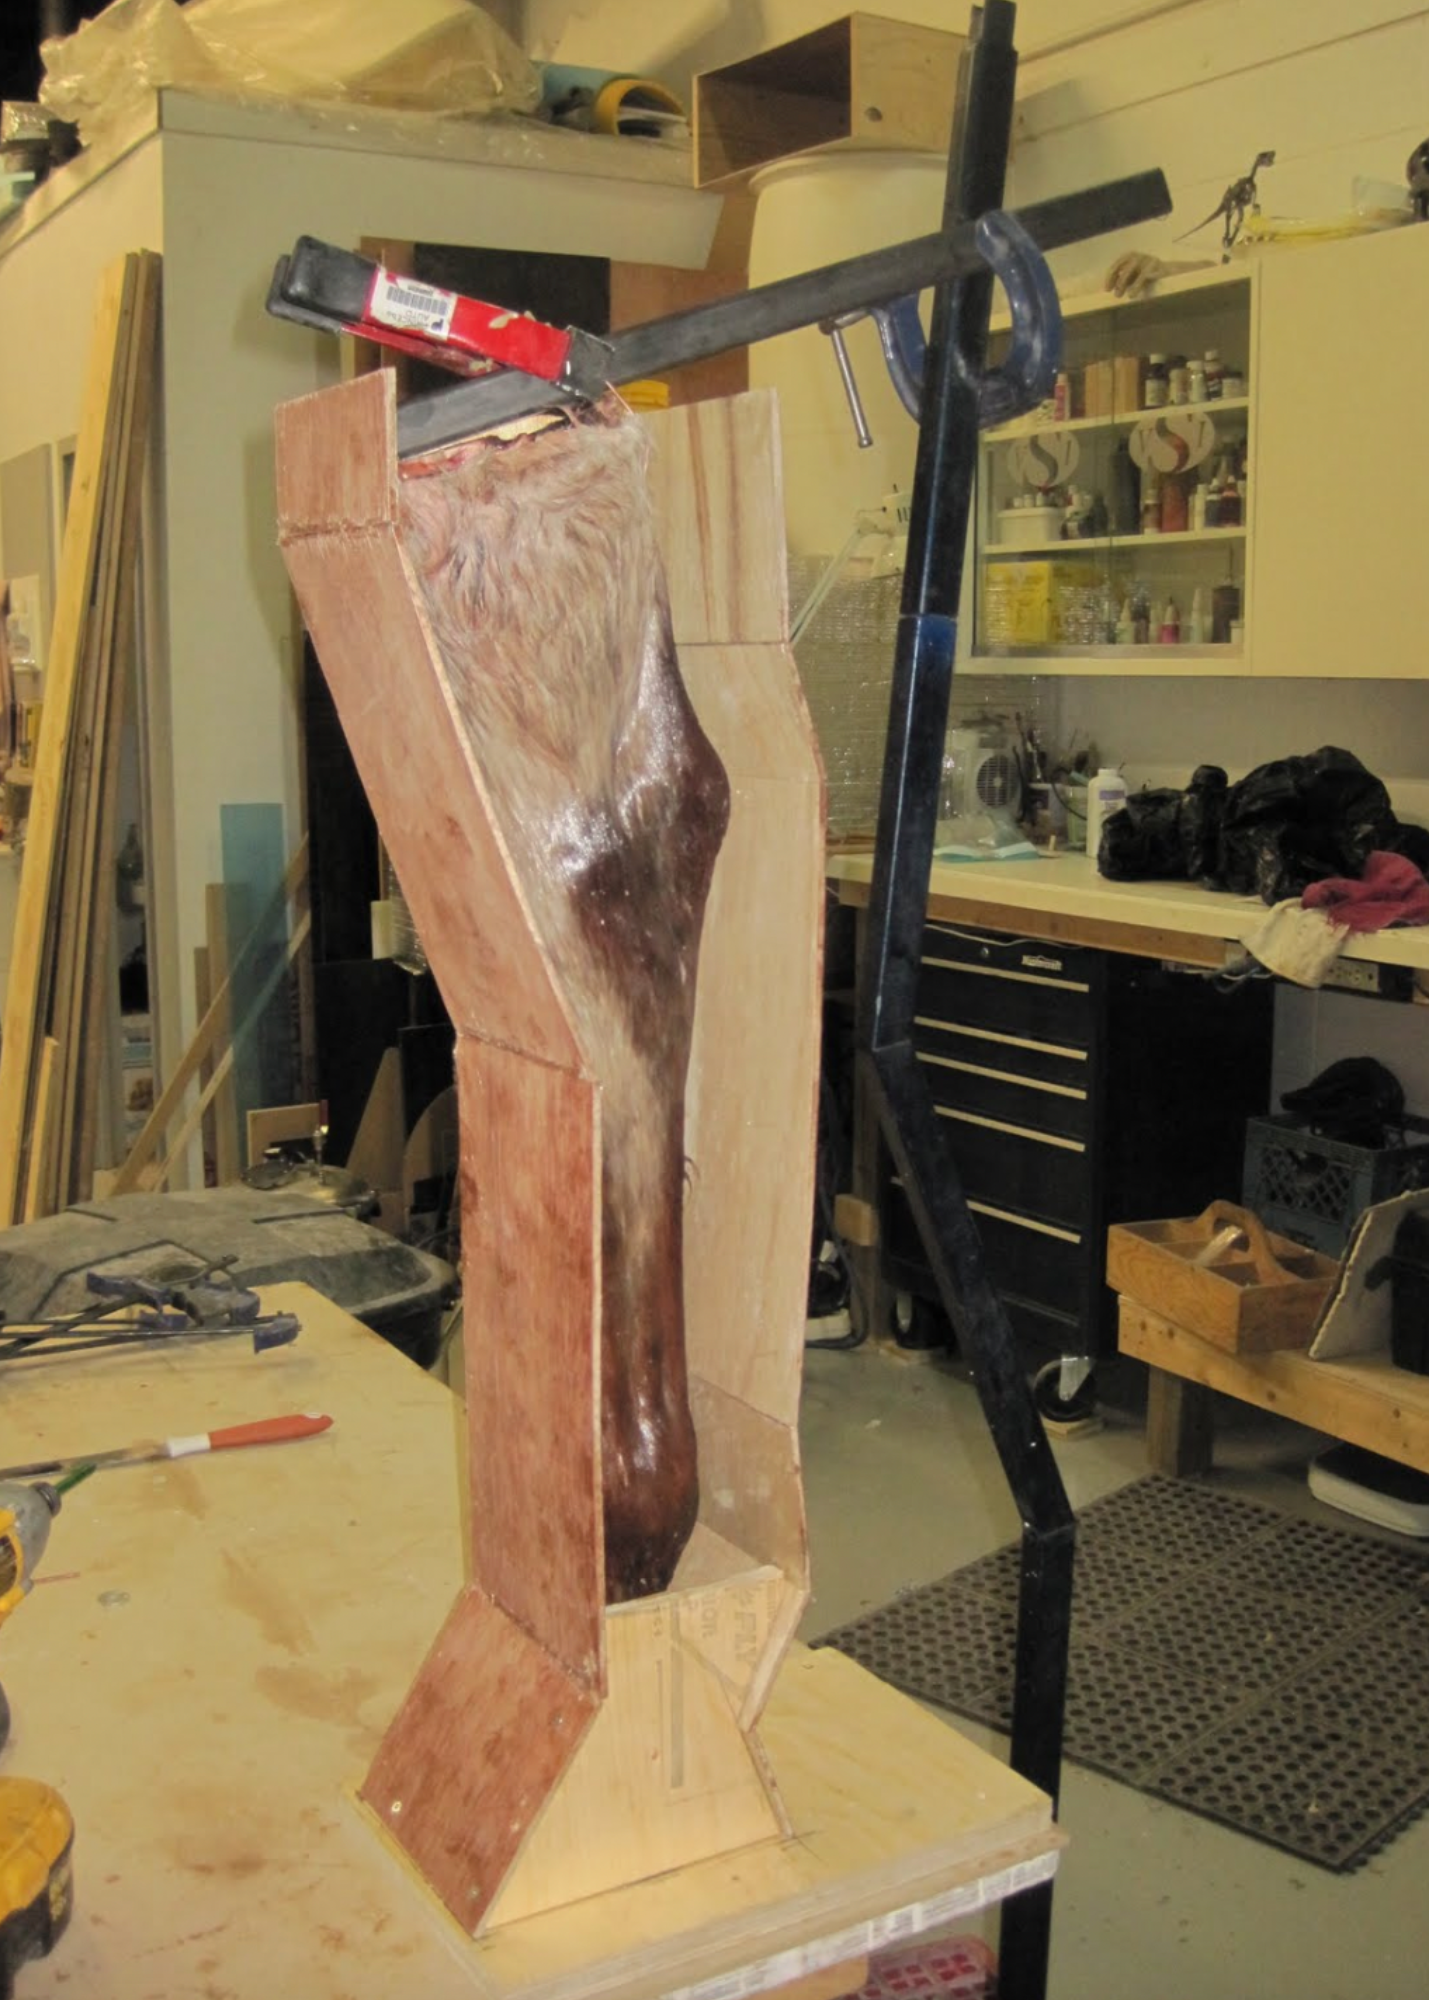  We have begun the process of creating the equine leg injection model. We have positioned the leg in preparation for the molding process. Here we see the equine hind leg ready for the coating of alginate. 